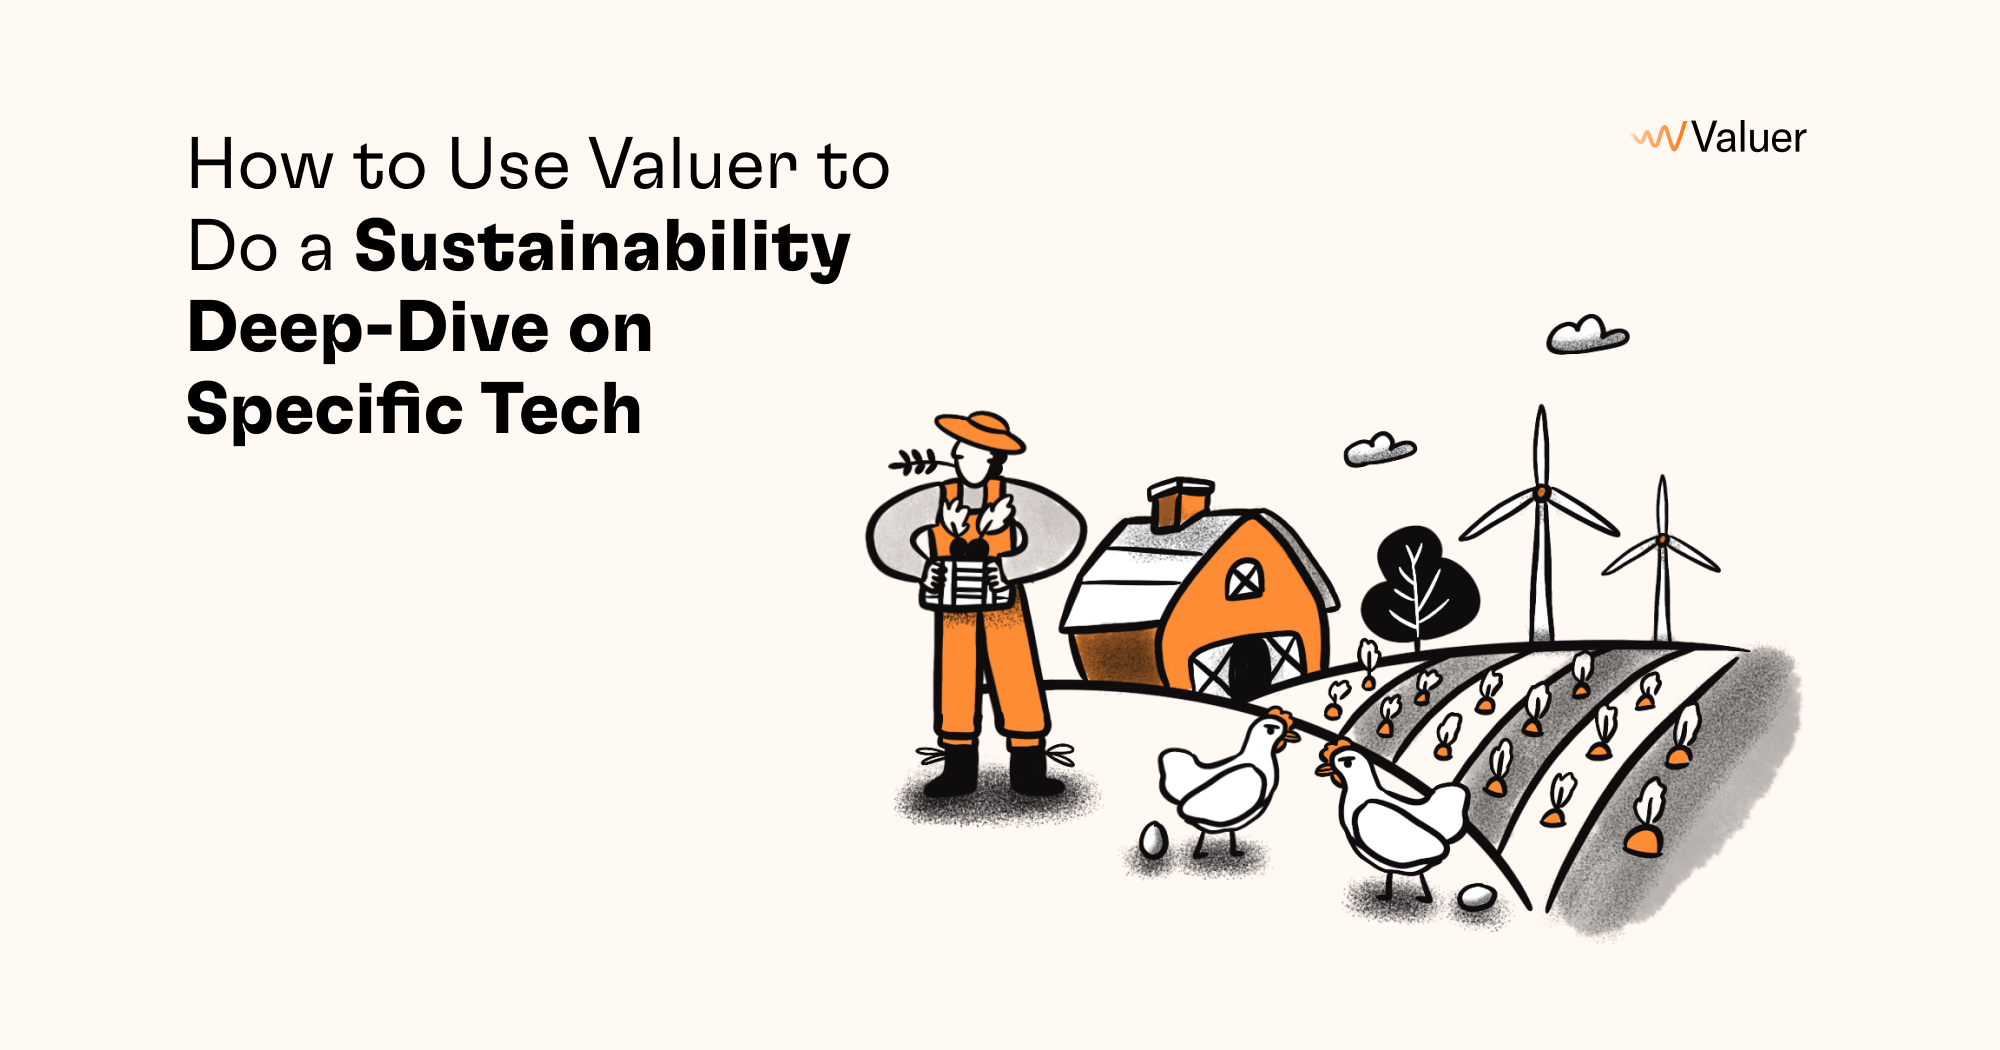 How to Use Valuer to Do a Sustainability Deep-Dive on Specific Tech